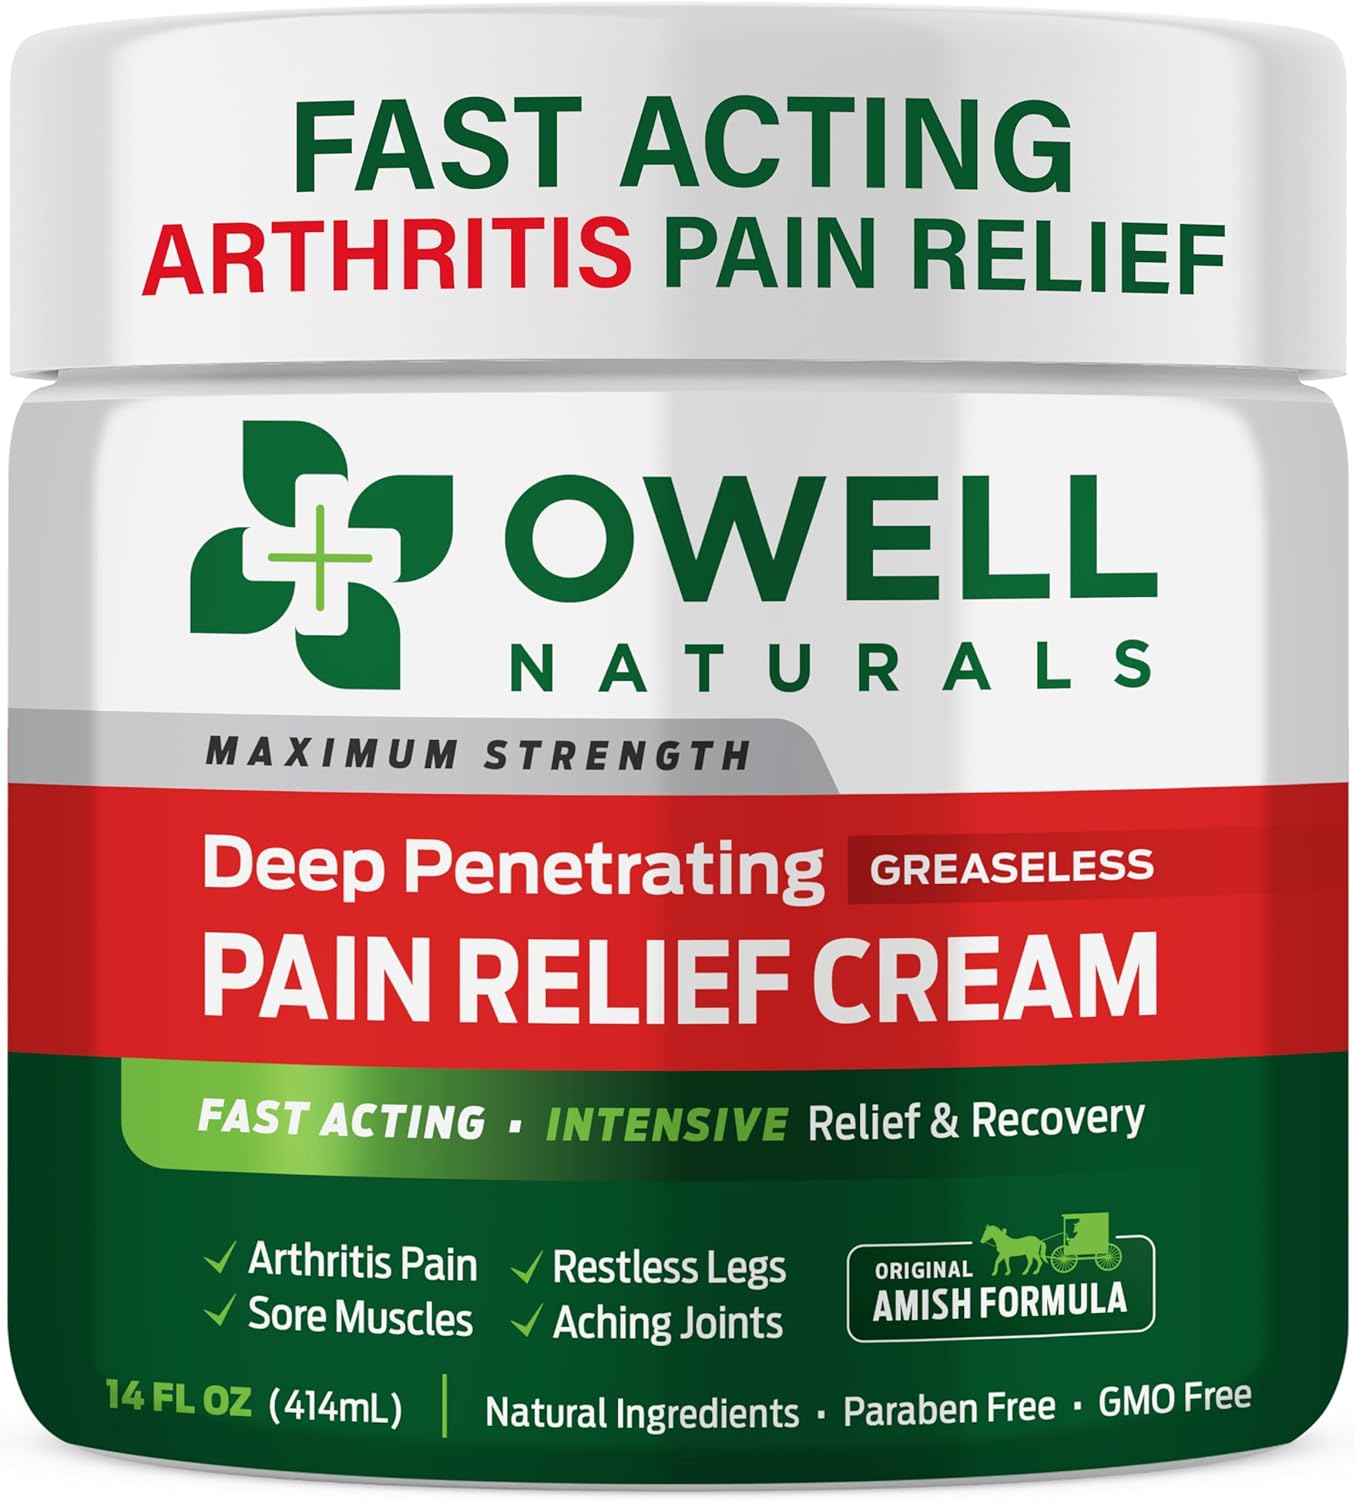 OWELL NATURALS Arthritis Pain Relief Cream - 14oz - Maximum Strength All Natural Discomfort Reliever for Joint, Muscle, Knee, Back, Neuropathy - 11 Powerful Ingredients